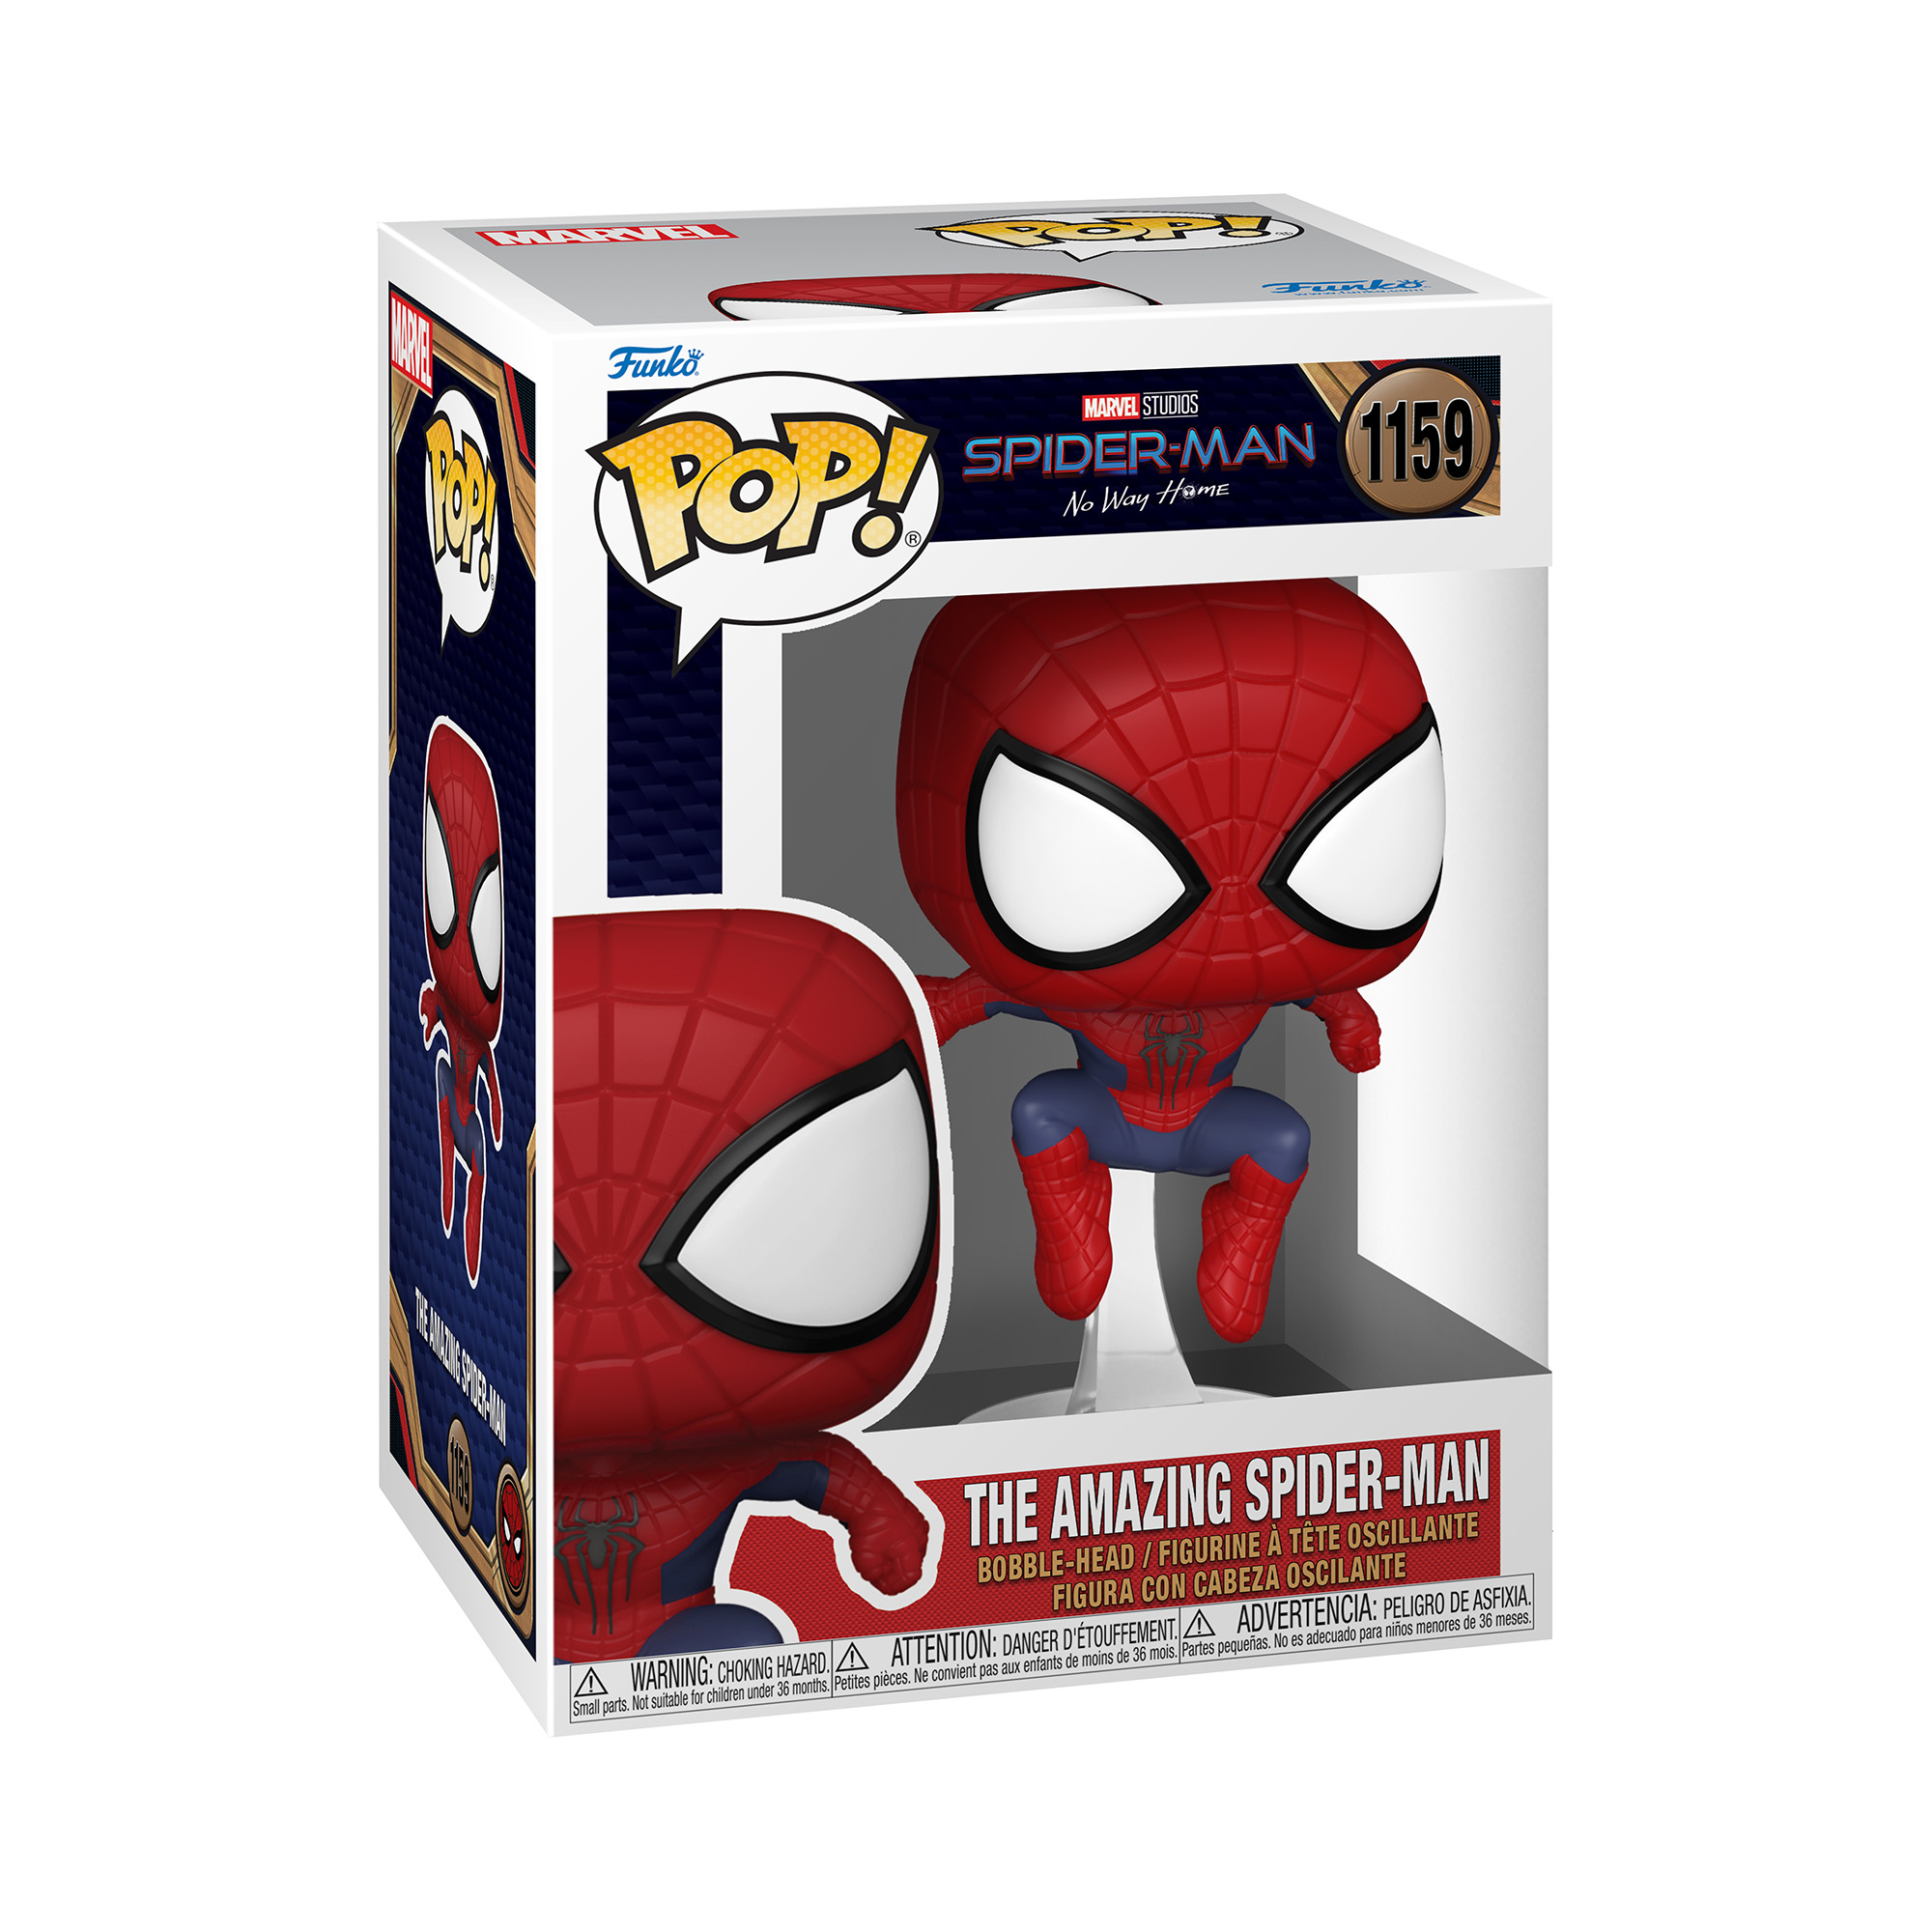 In-box look at Pop! The Amazing Spider-Man from Spider-Man: No Way Home.